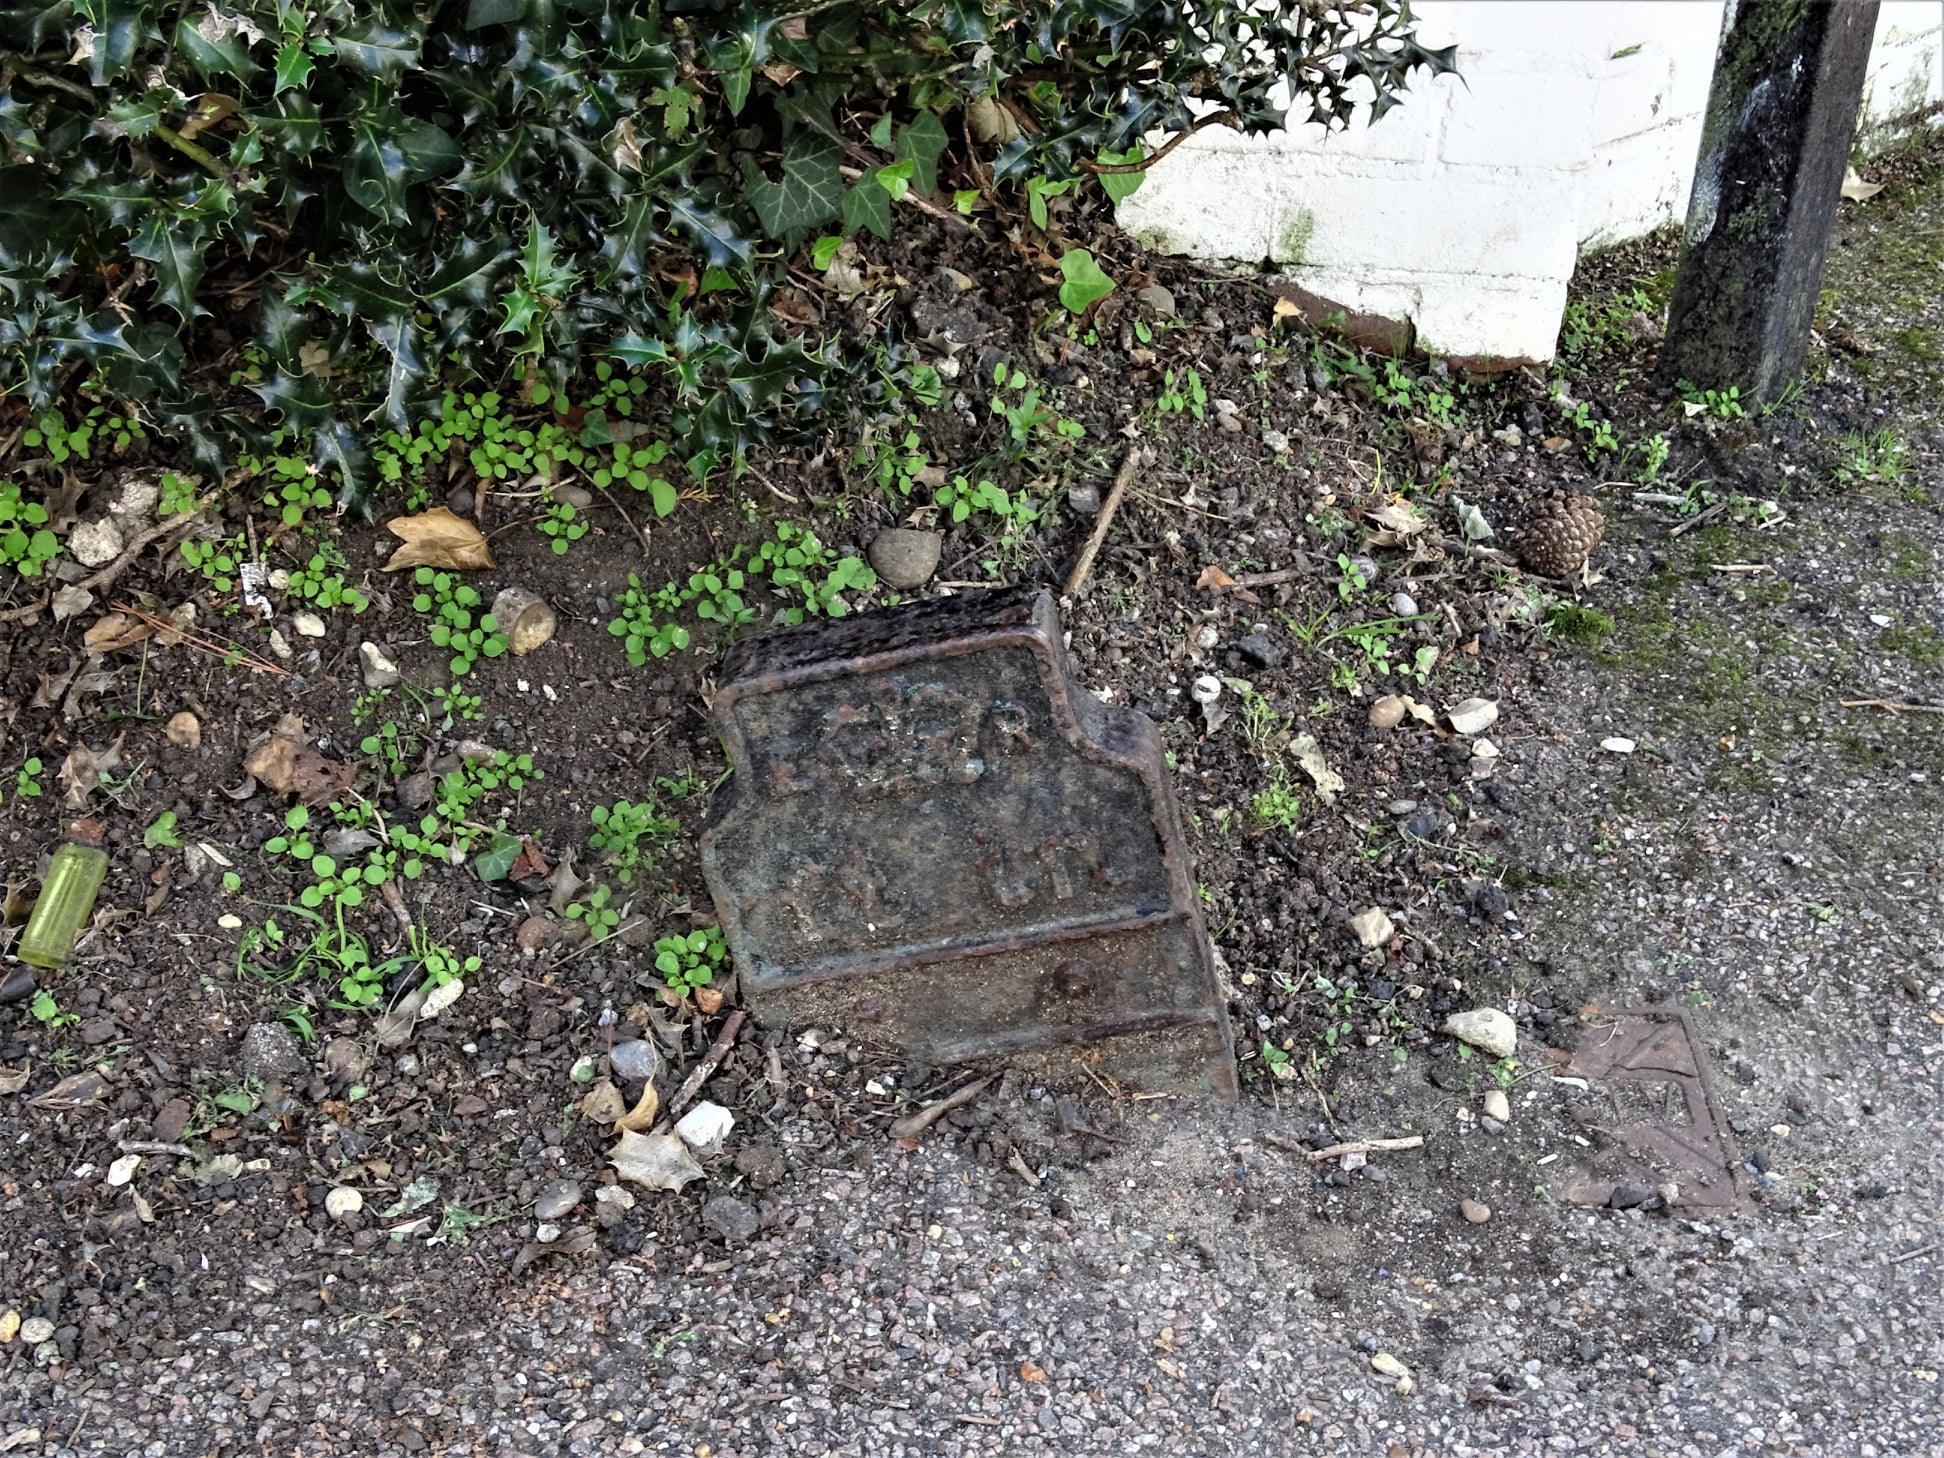 Telegraph cable marker post at opp. 66 High Road, Bushey, Herts by Stephen Danzig 